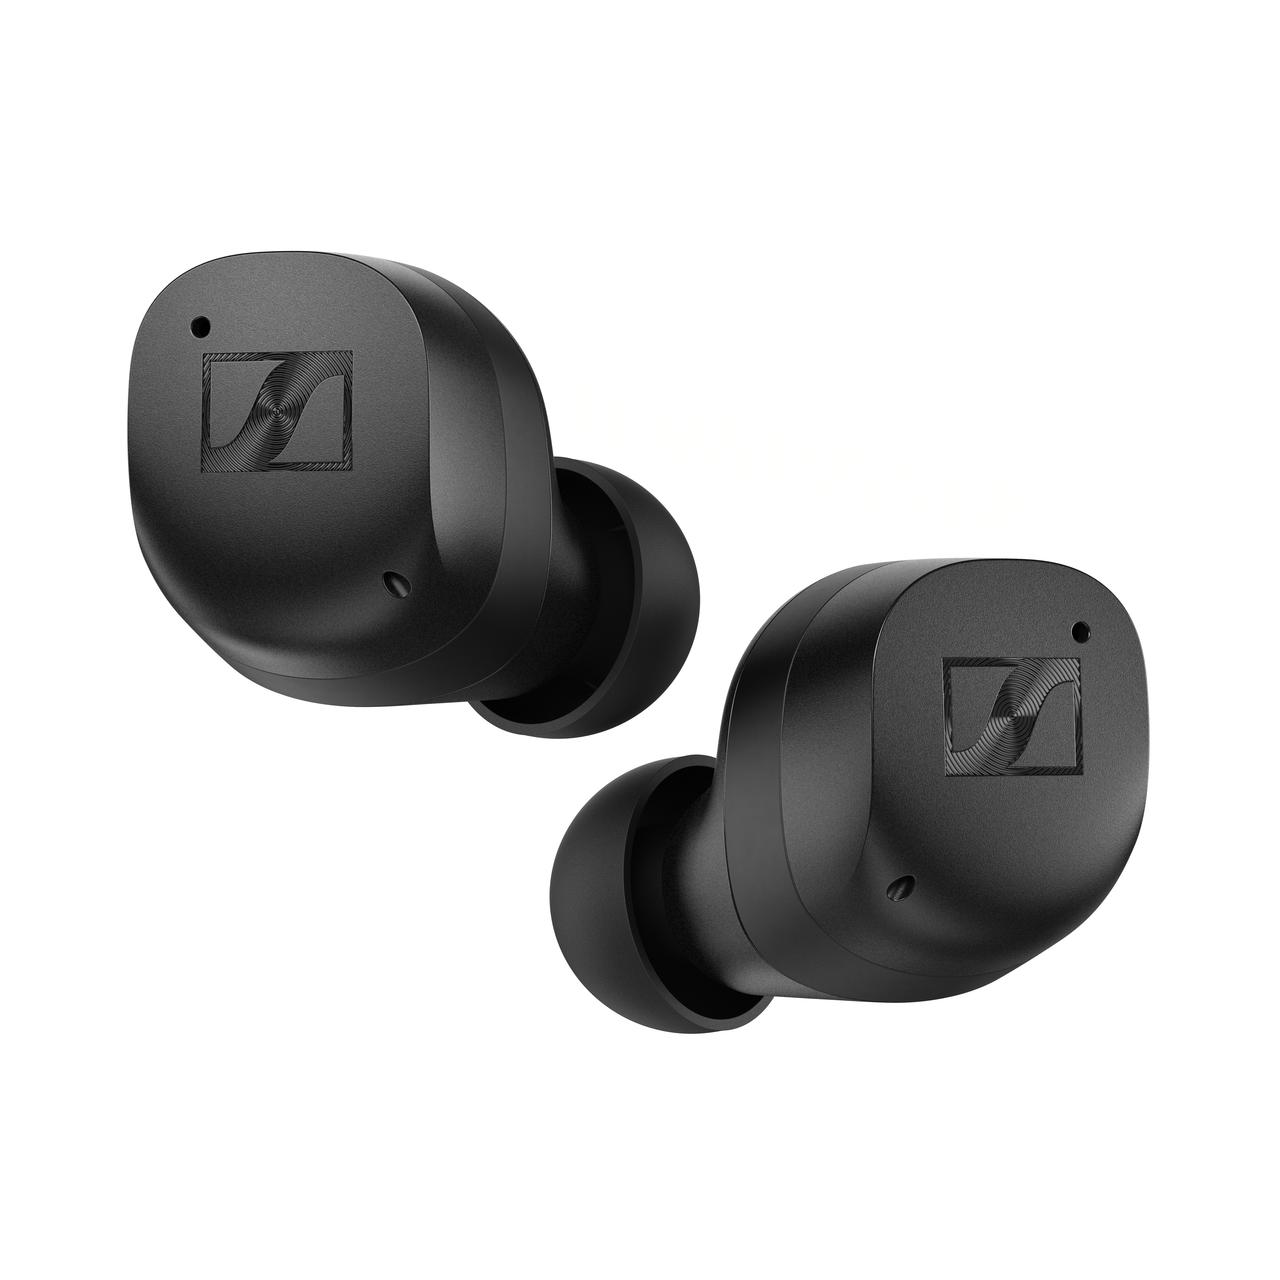 Sennheiser MOMENTUM True Wireless 3 Earbuds -Bluetooth In-Ear Headphones for Music and Calls with ANC, Multipoint connectivity , IPX4, Qi charging, 28-hour Battery Life Compact Design - Black - image 2 of 5